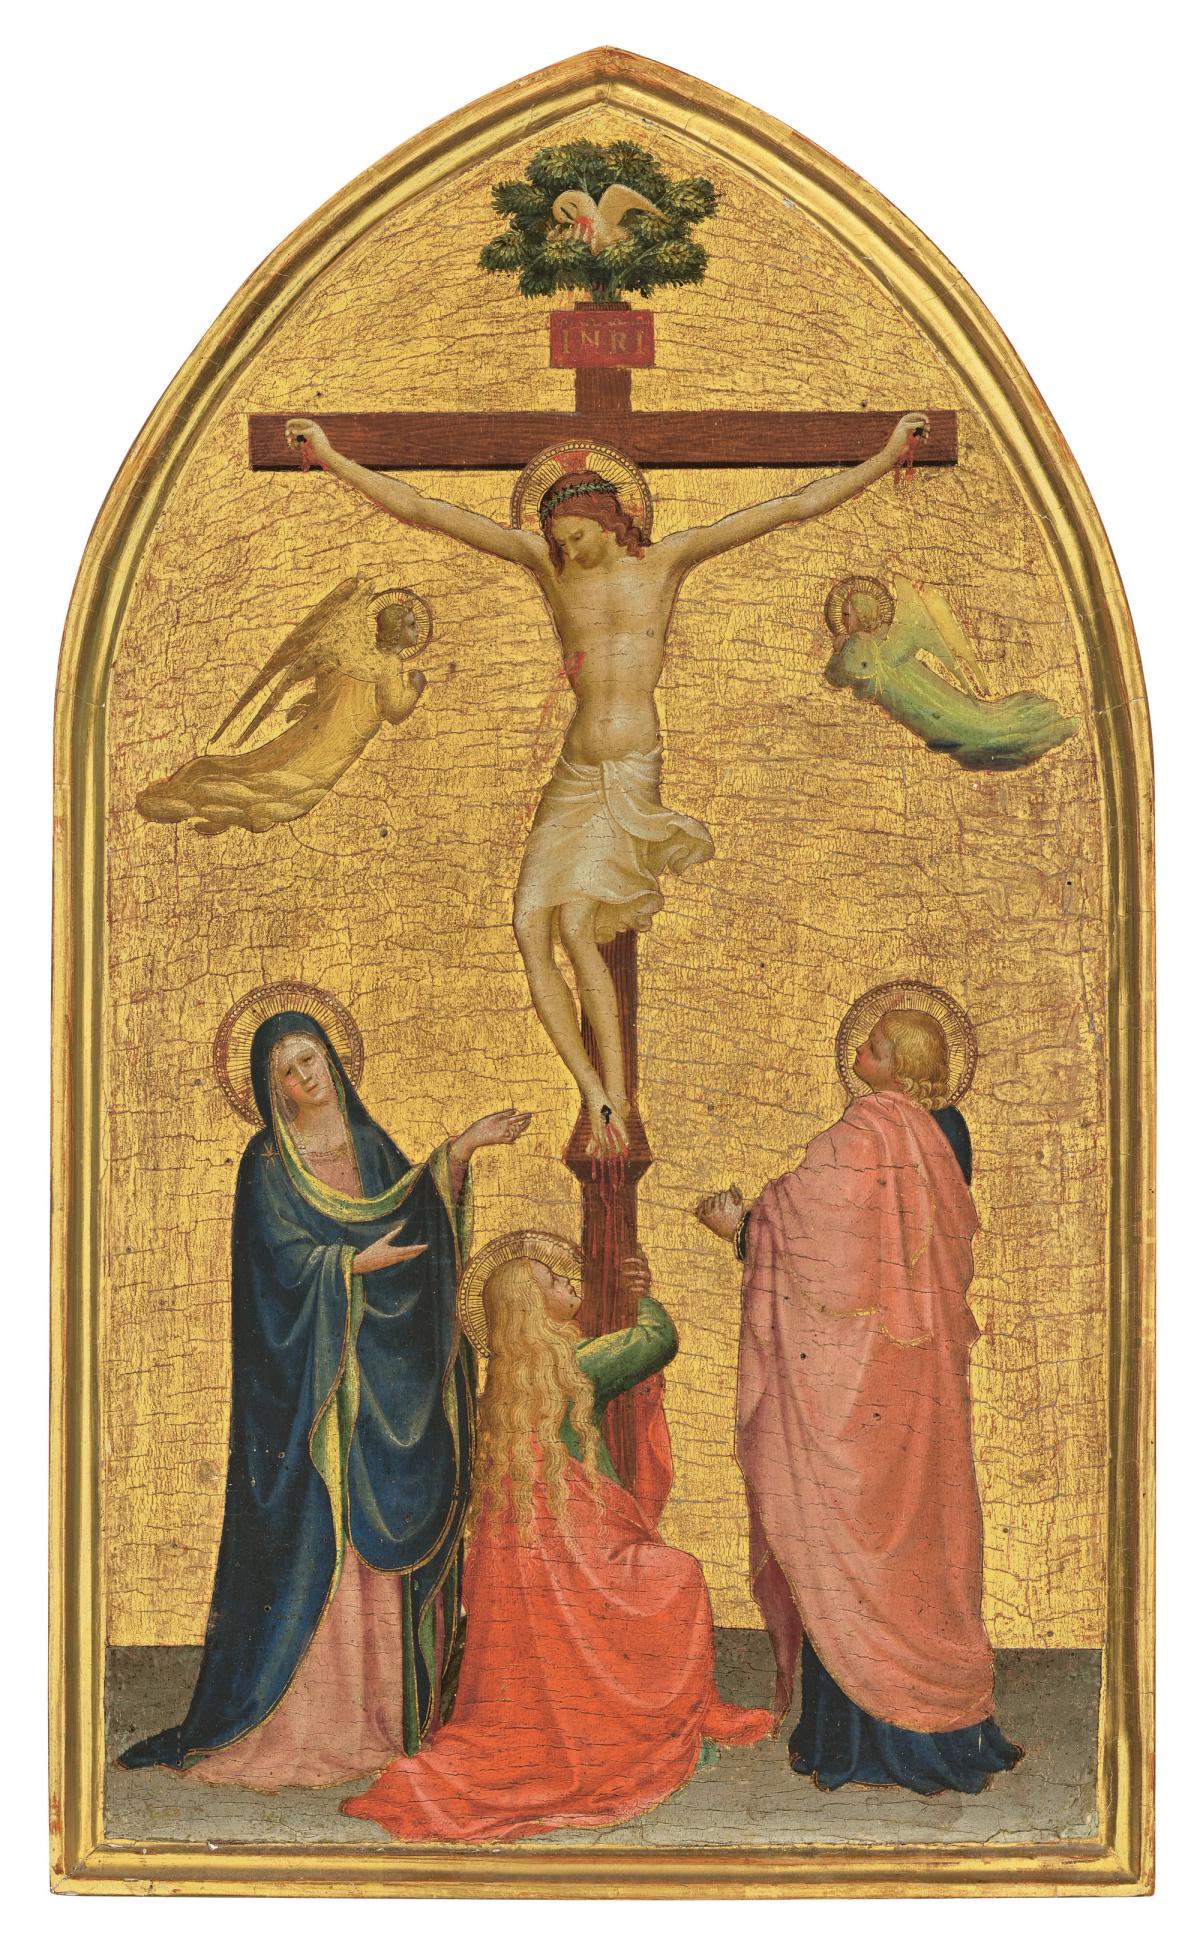 Christ on the Cross, with the Virgin, St John the Evangelist and the Magdalen by Fra Angelico

Courtesy of Christie's

